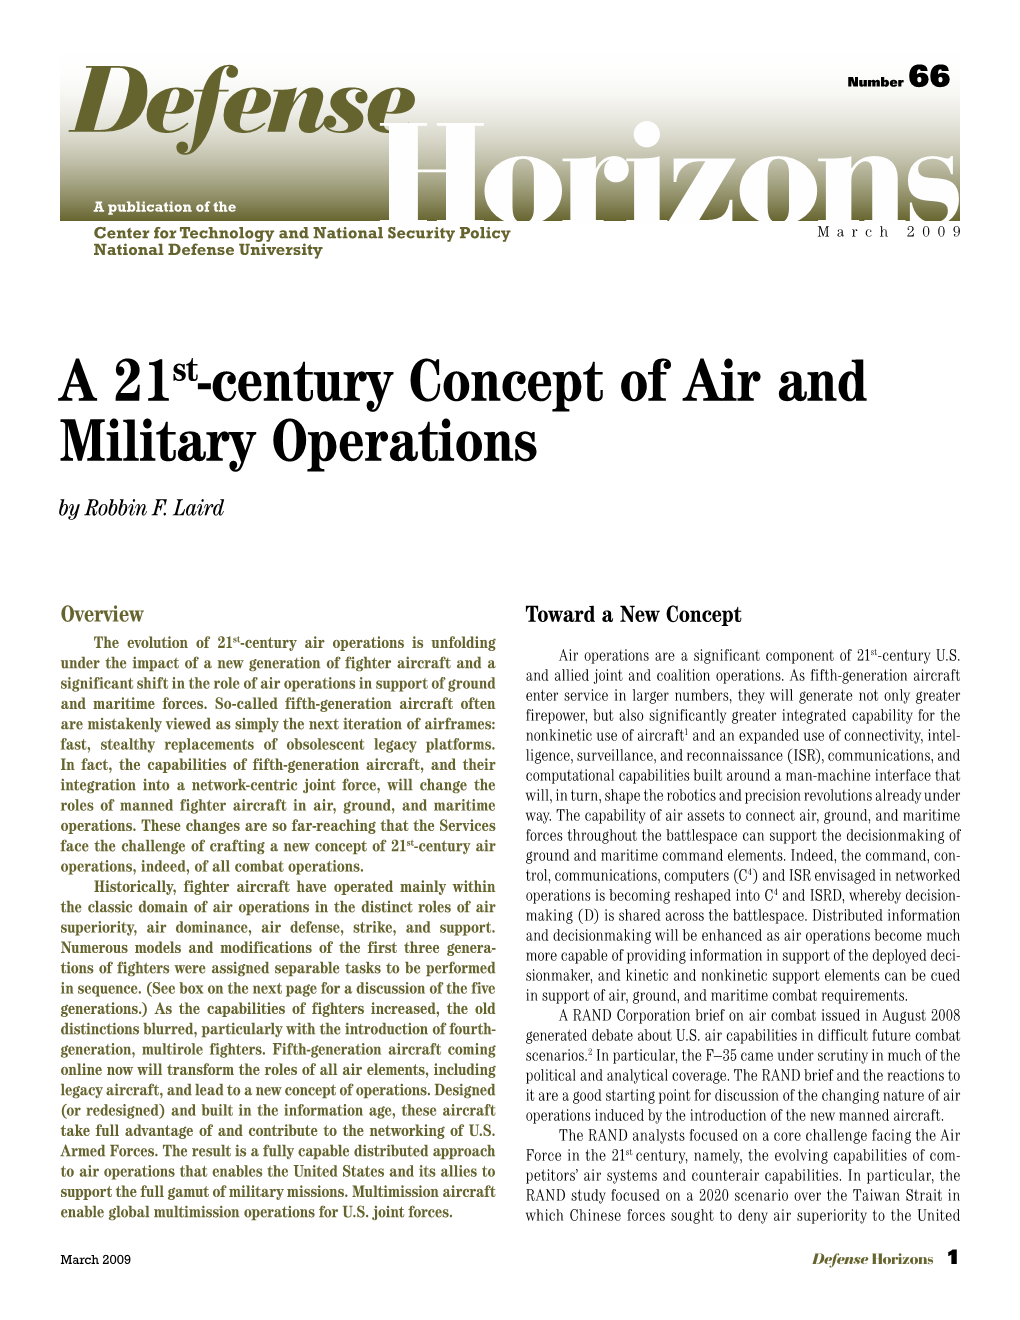 A 21St-Century Concept of Air and Military Operations by Robbin F